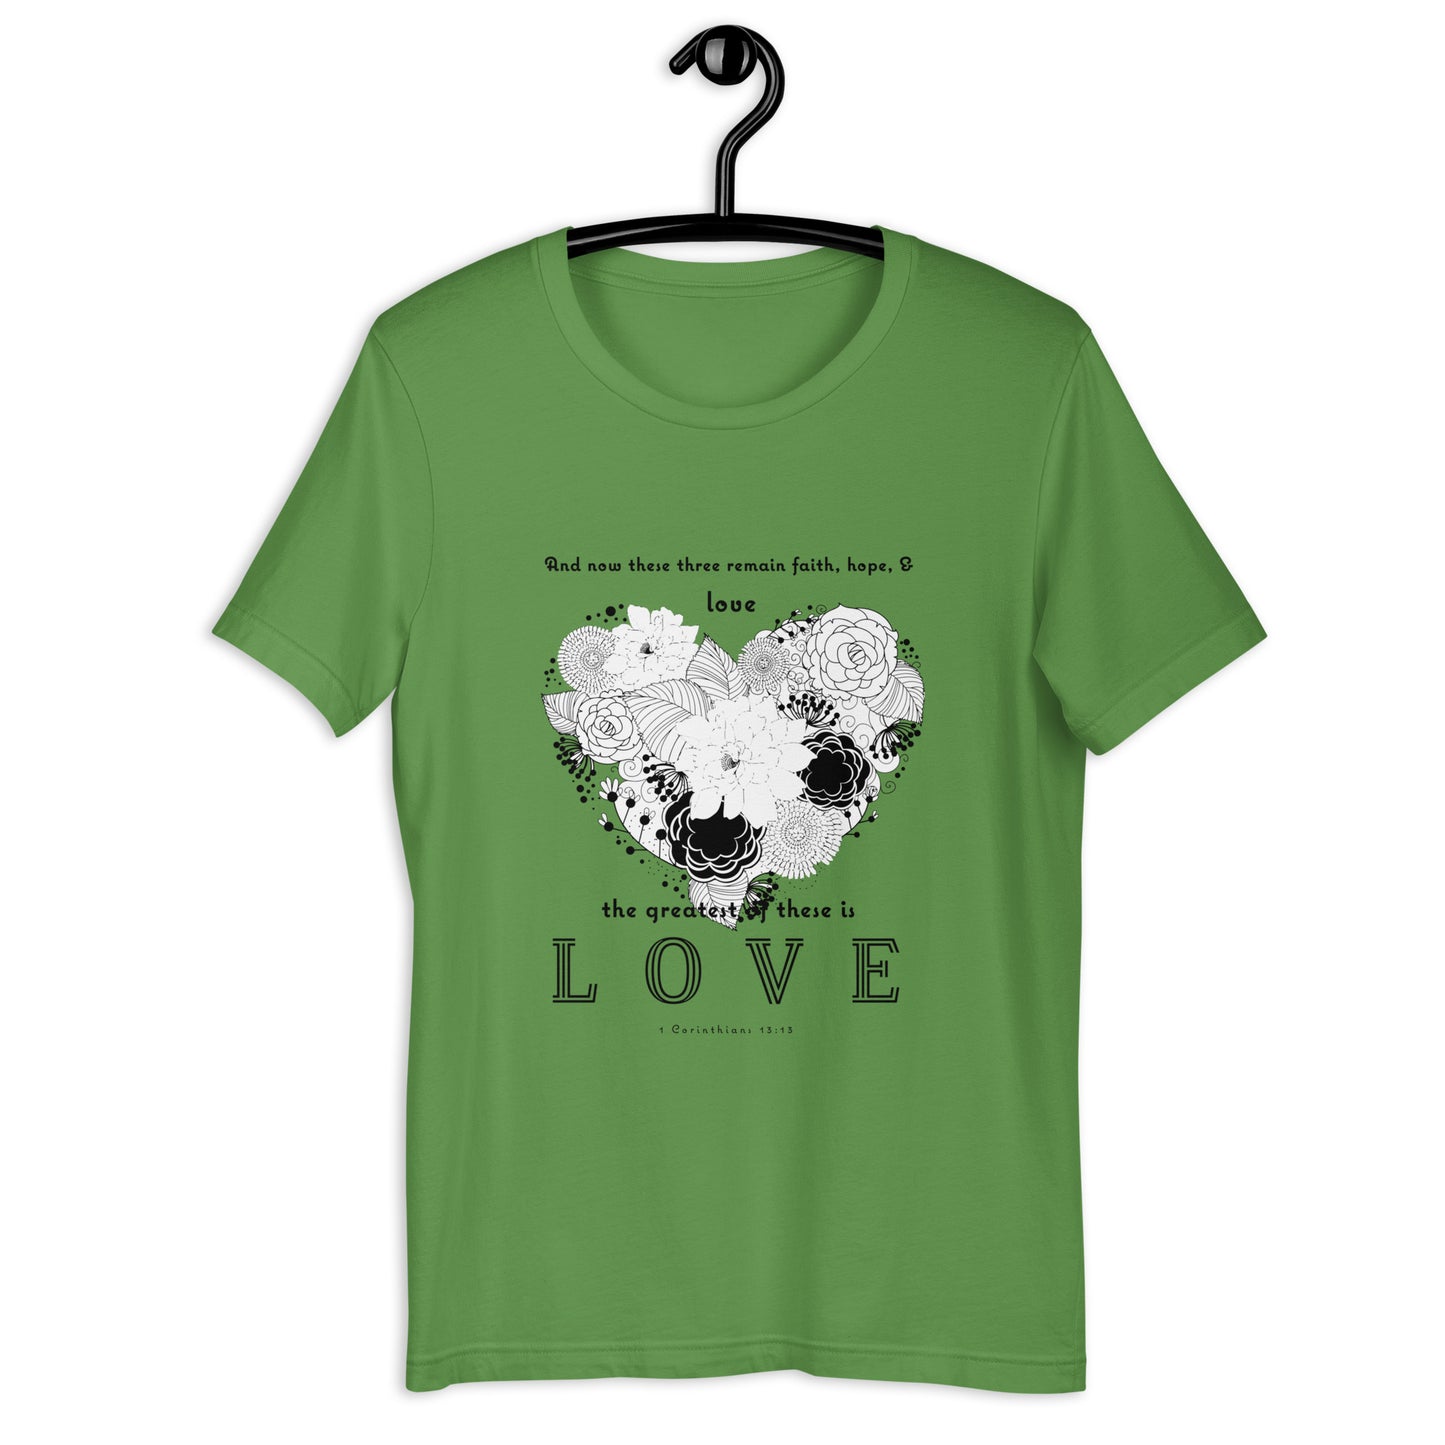 1 Corinthians 13:13 Greatest Love T-Shirt in Leaf - on hanger front view